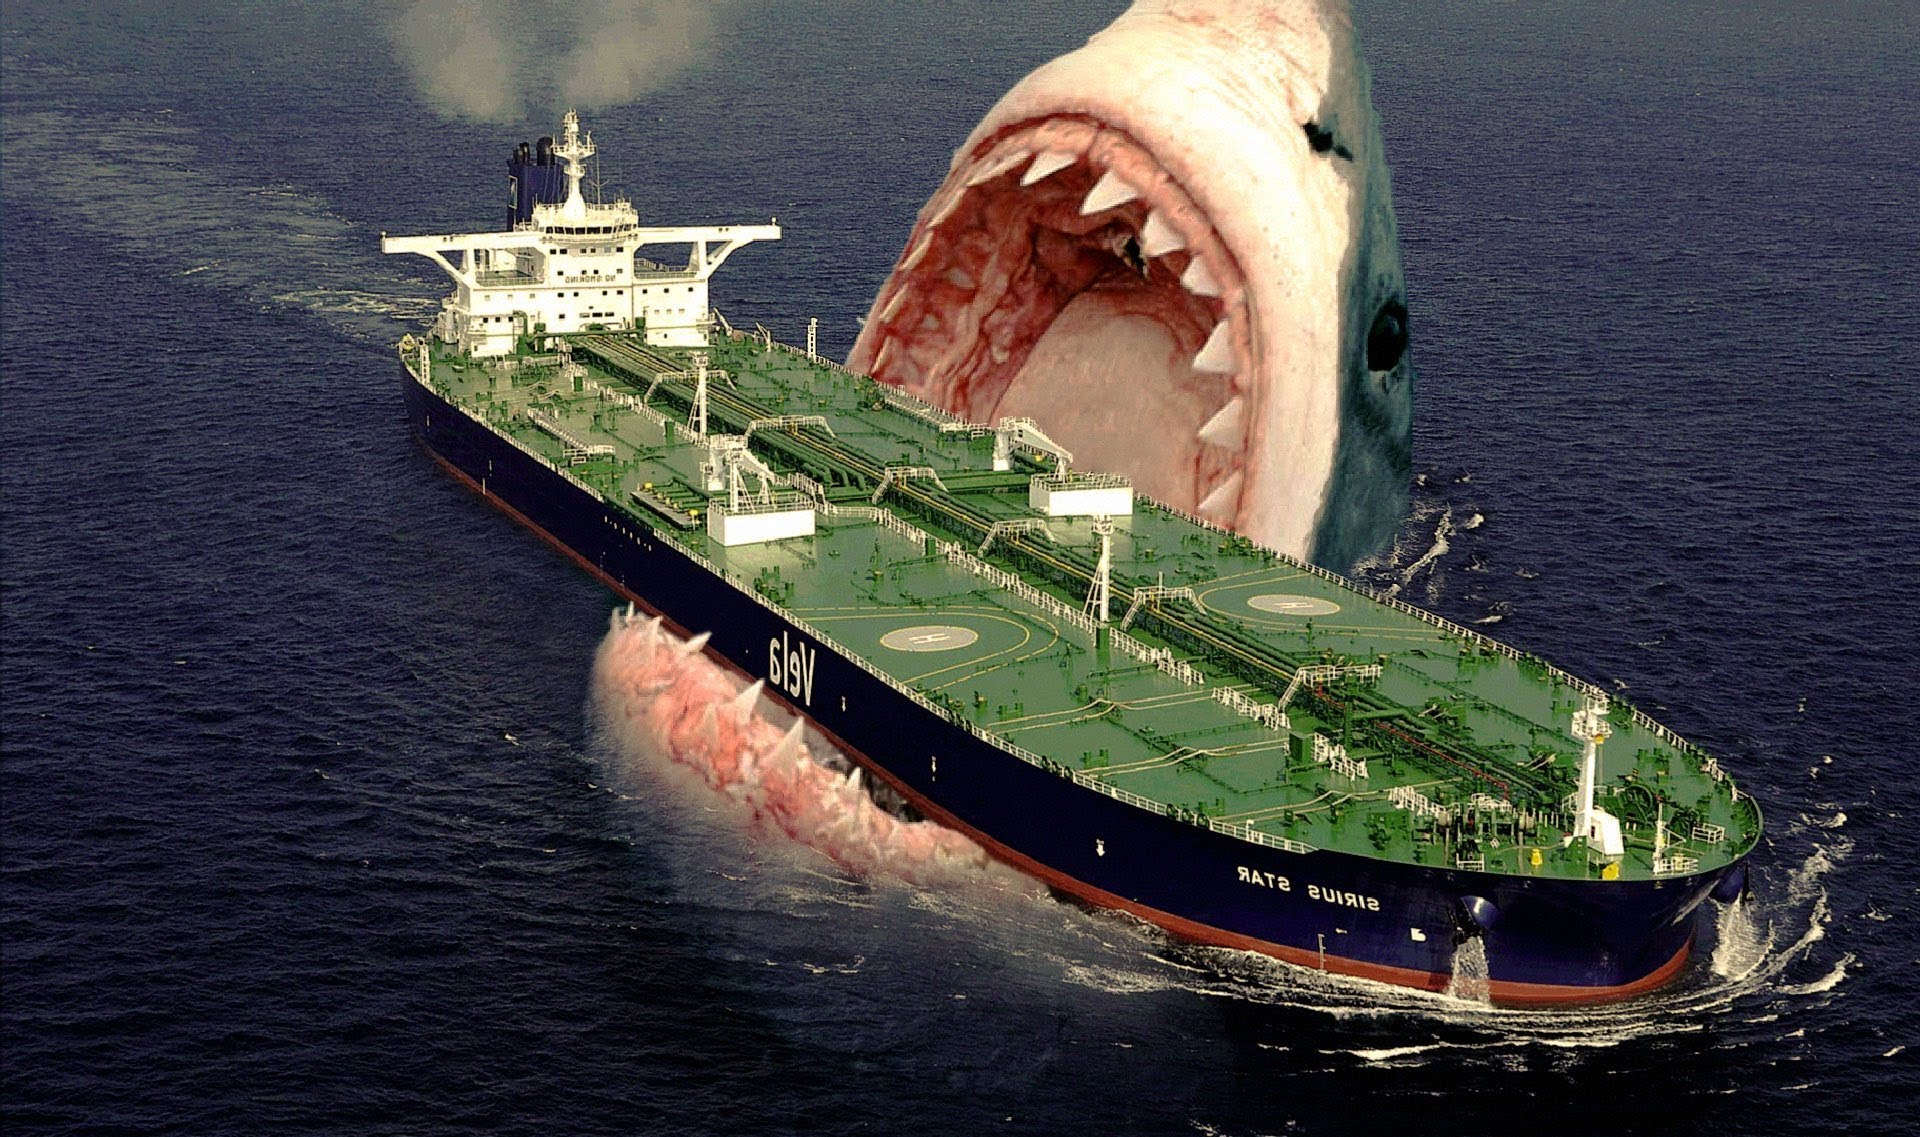 Watch out for the Megalodon